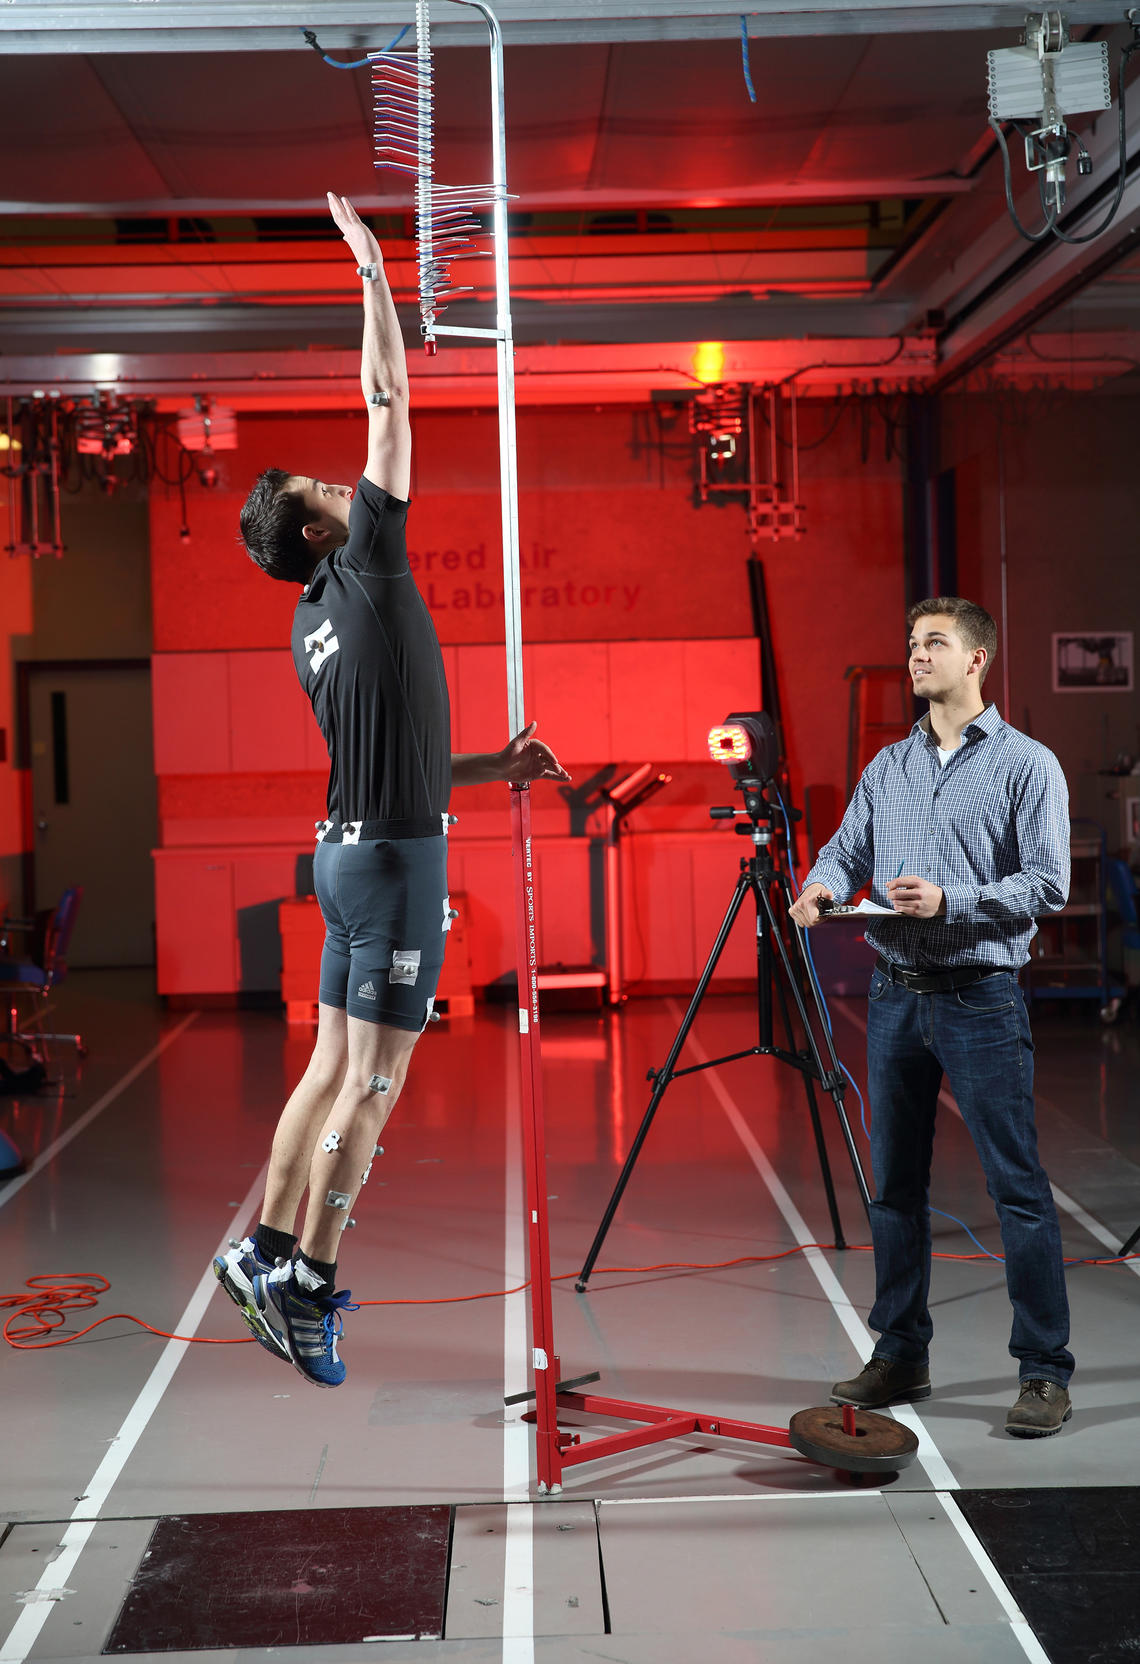 Maurice Mohr's doctoral thesis investigated the long-term consequences of a sport-related knee injury. Here, he tests the subject's jump height while recording his lower body movement via 3D motion capture.